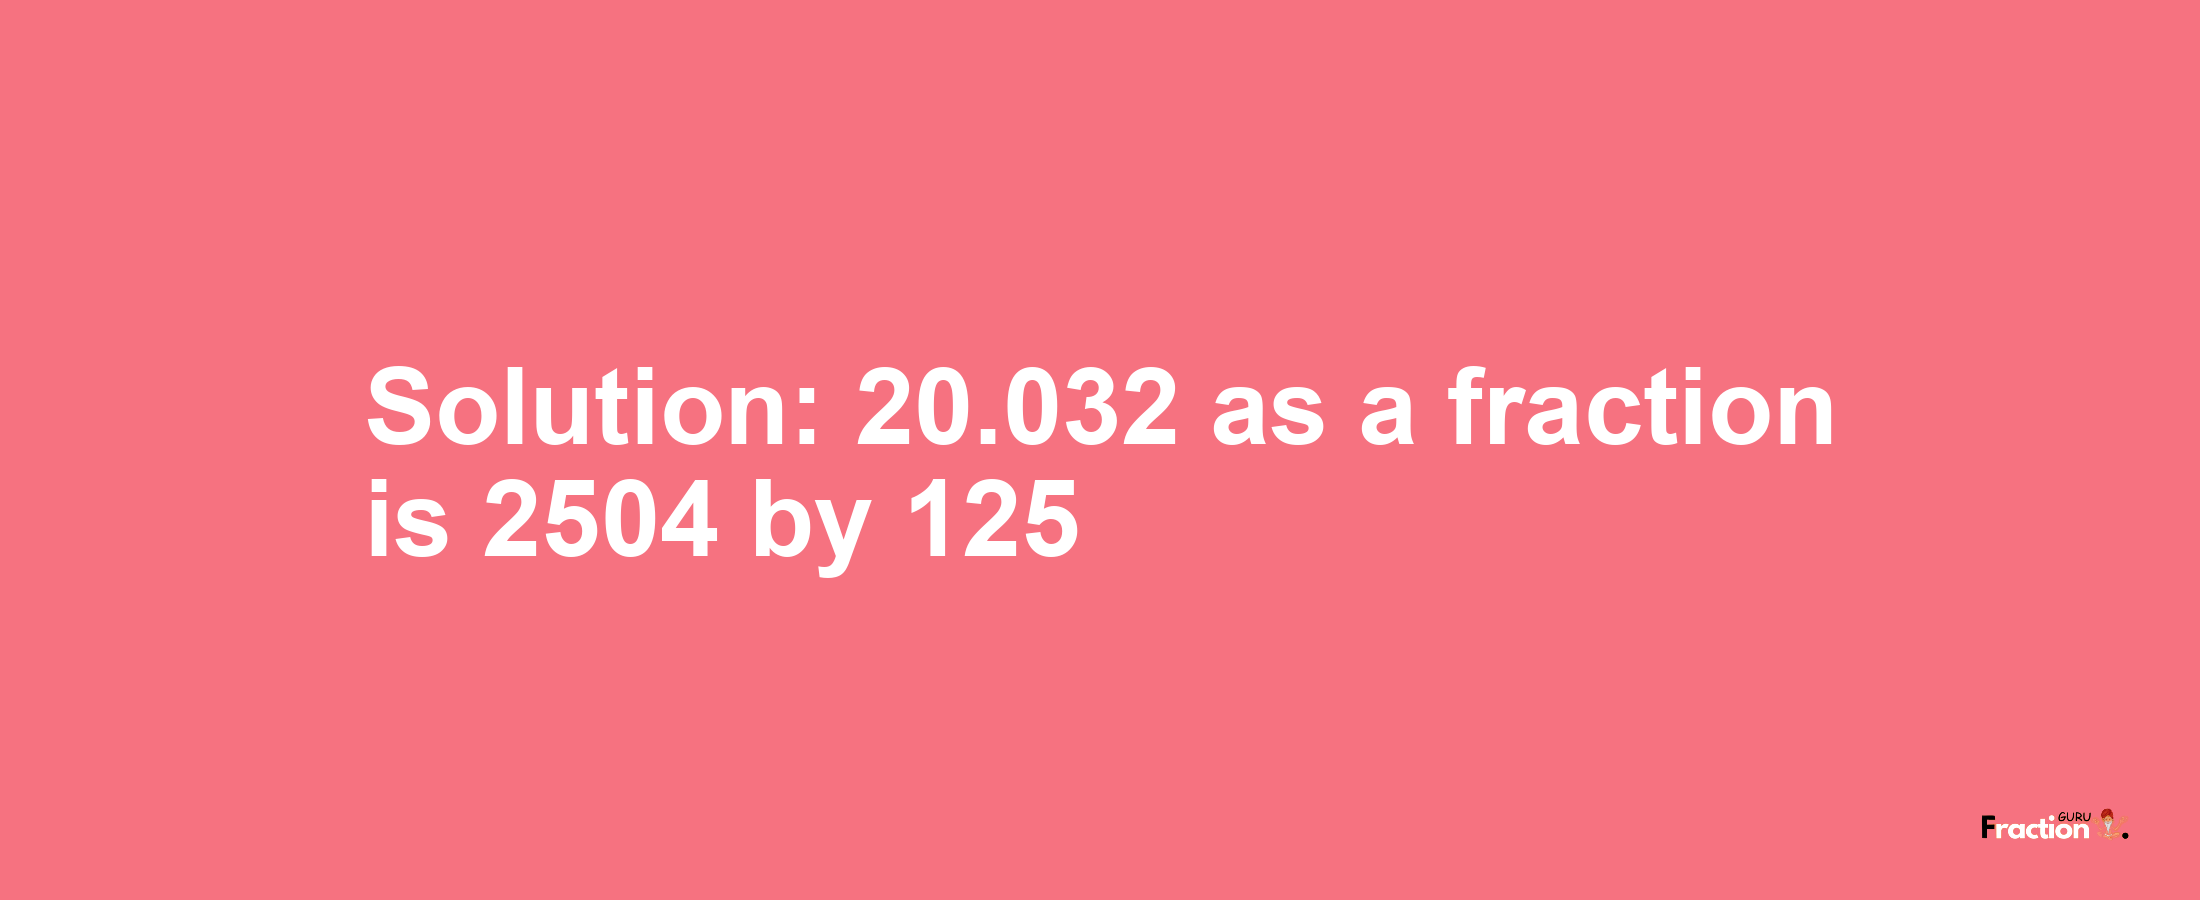 Solution:20.032 as a fraction is 2504/125